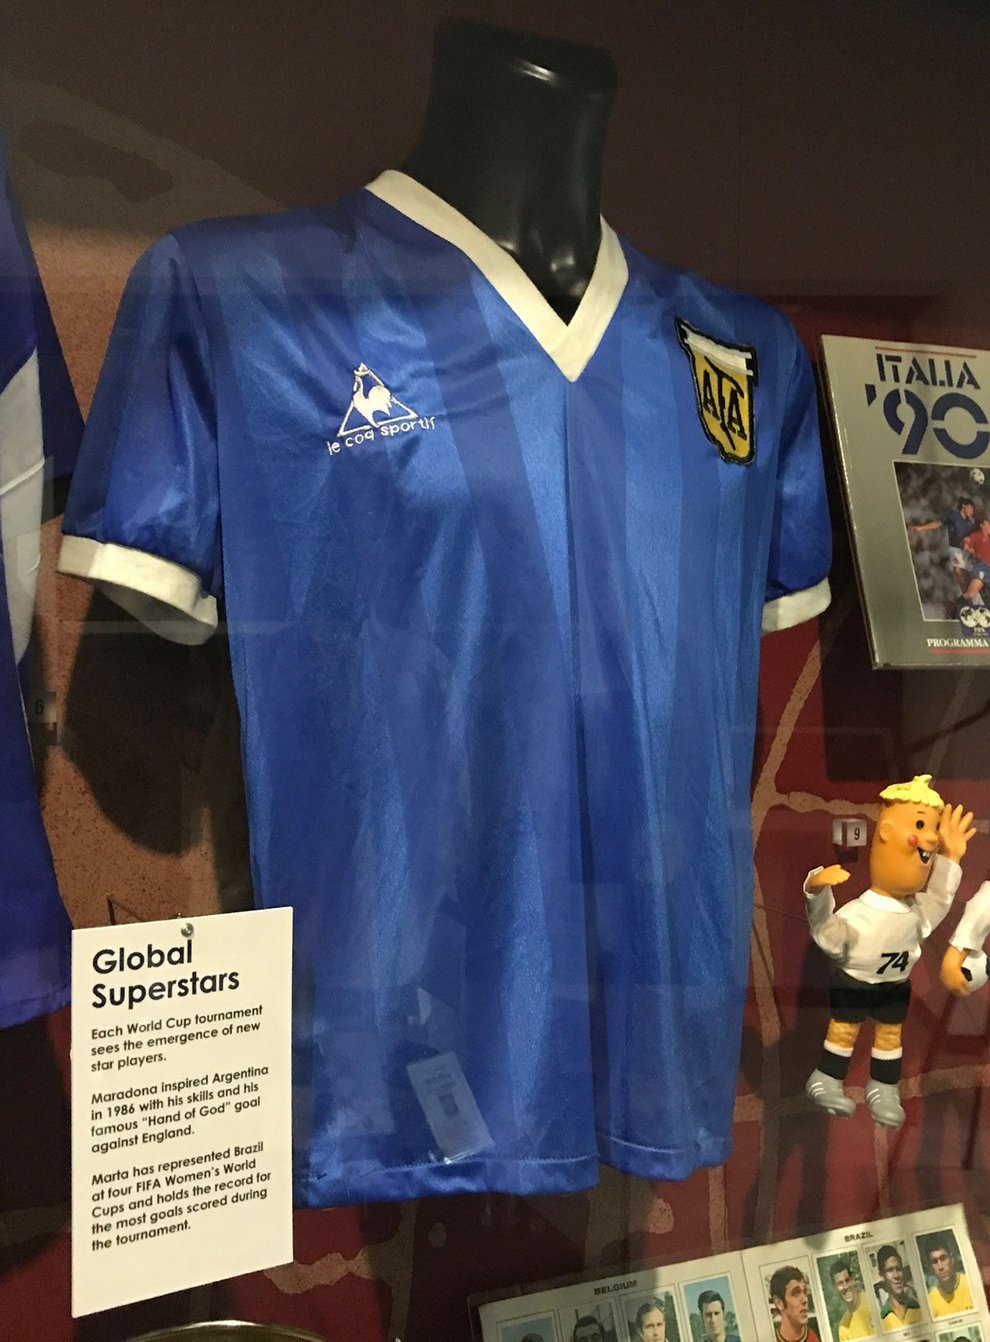 The shirt Diego Maradona wore when he played England in 1986 is on display at the National Football Museum in Manchester